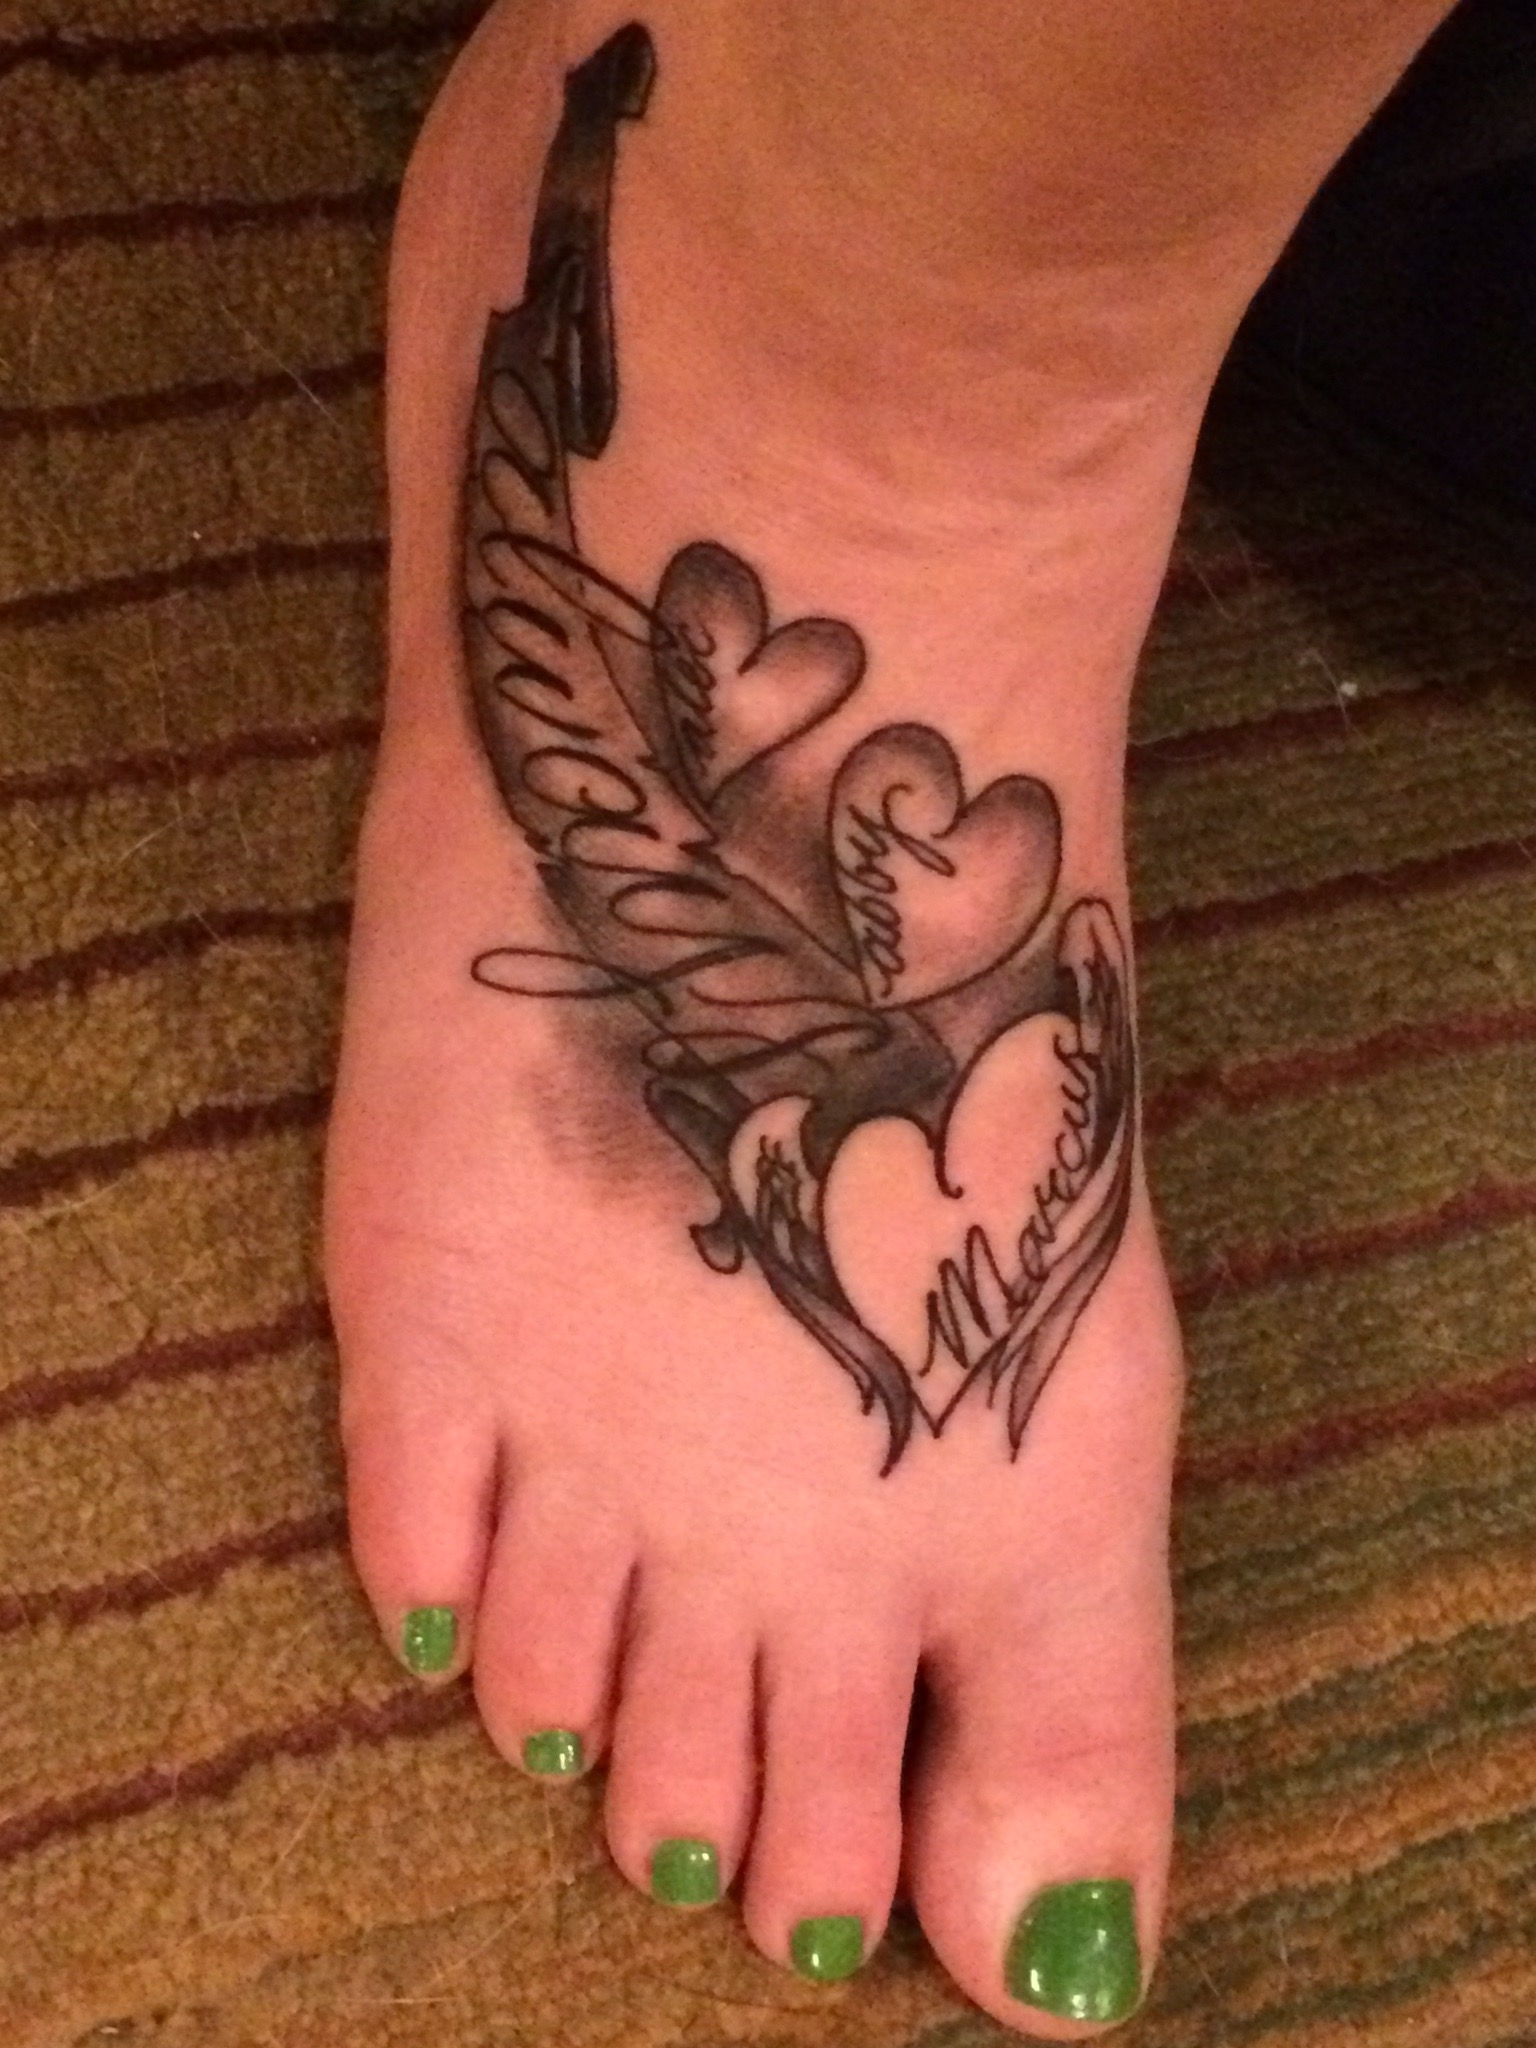 Hospice of the Western Reserve - Memorializing Loved Ones with Tattoos